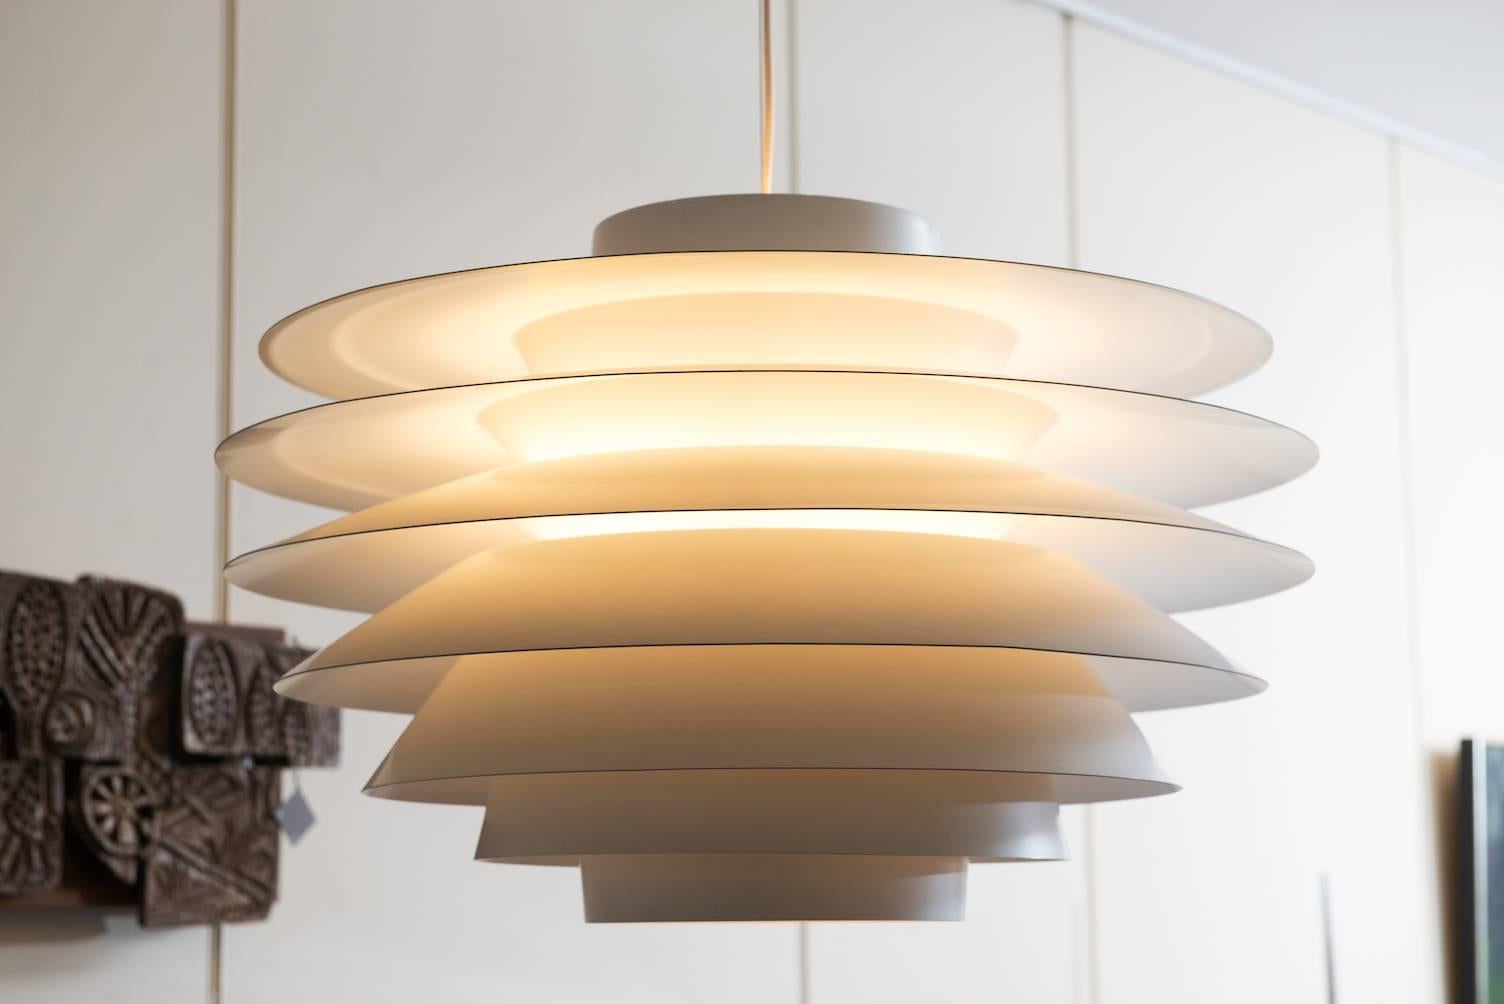 Large Verona white lacquered ceiling lamp.
Producer: Nordisk Solar.